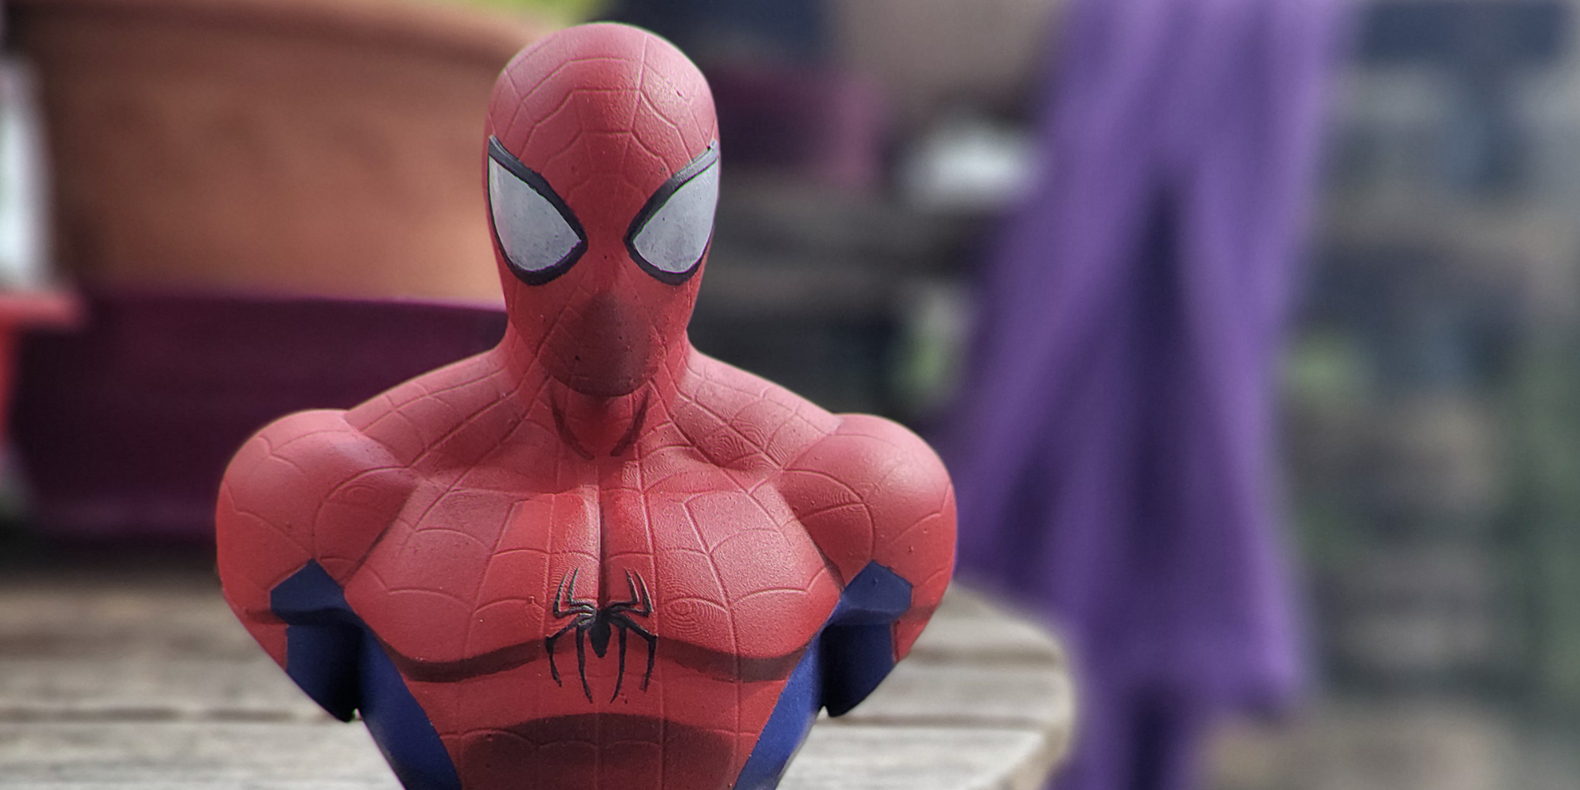 Find here a selection of the best 3D models from the spiderman universe